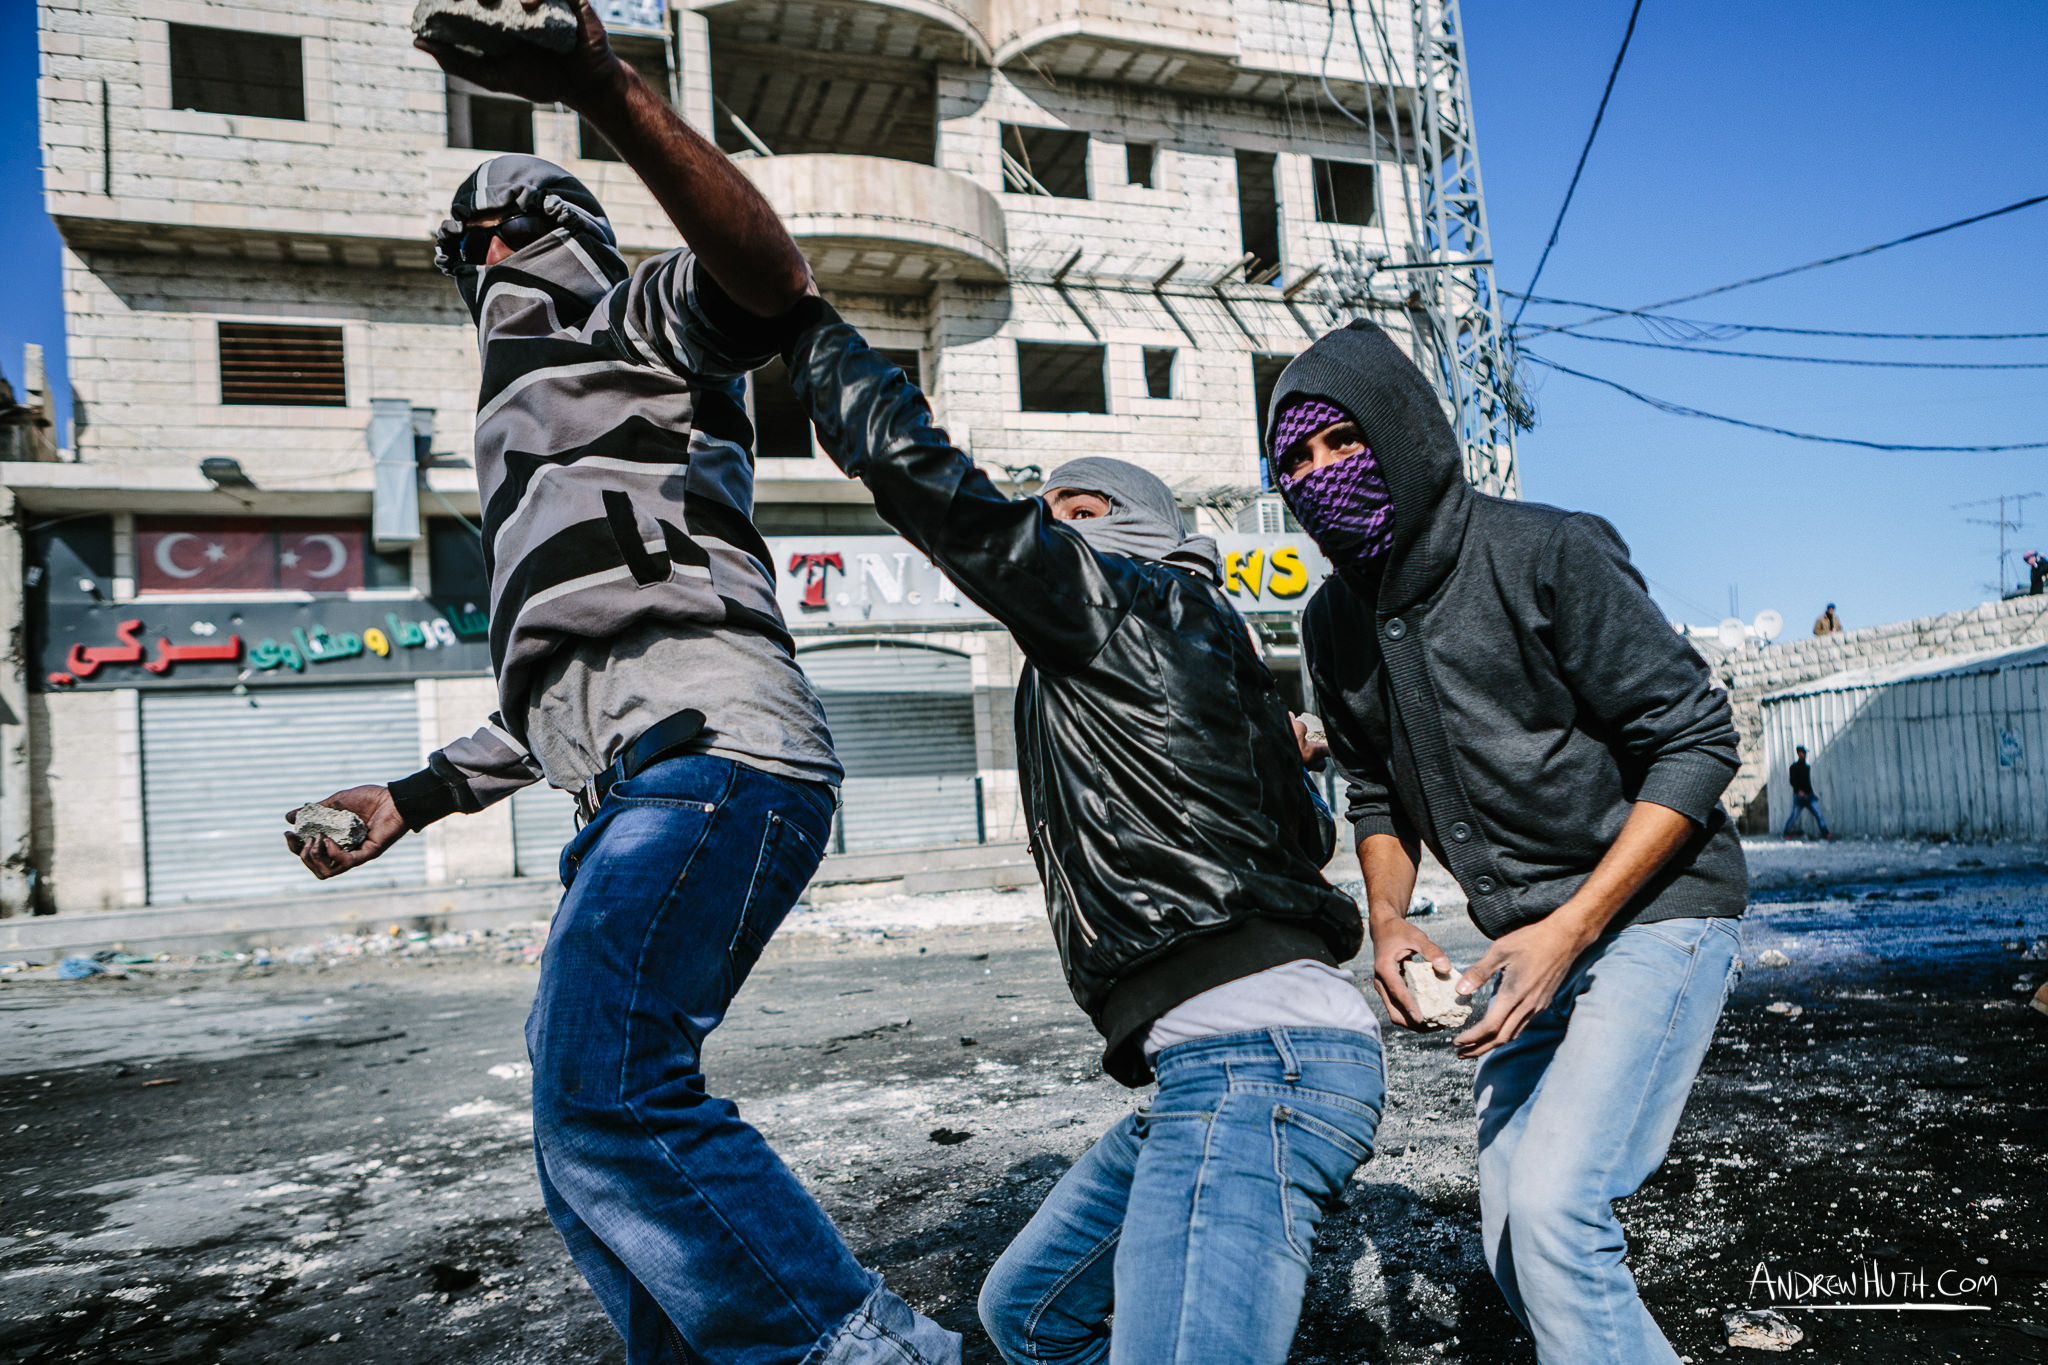  Palestinian youth clash with Israeli military in Shu'afat Refugee Camp in East Jerusalem on Friday, November 7, 2014. &nbsp;The recent, but temporarily total closure of one of Muslim's holiest sites, the Al-Aqsa Mosque, (the first since 1967) and th